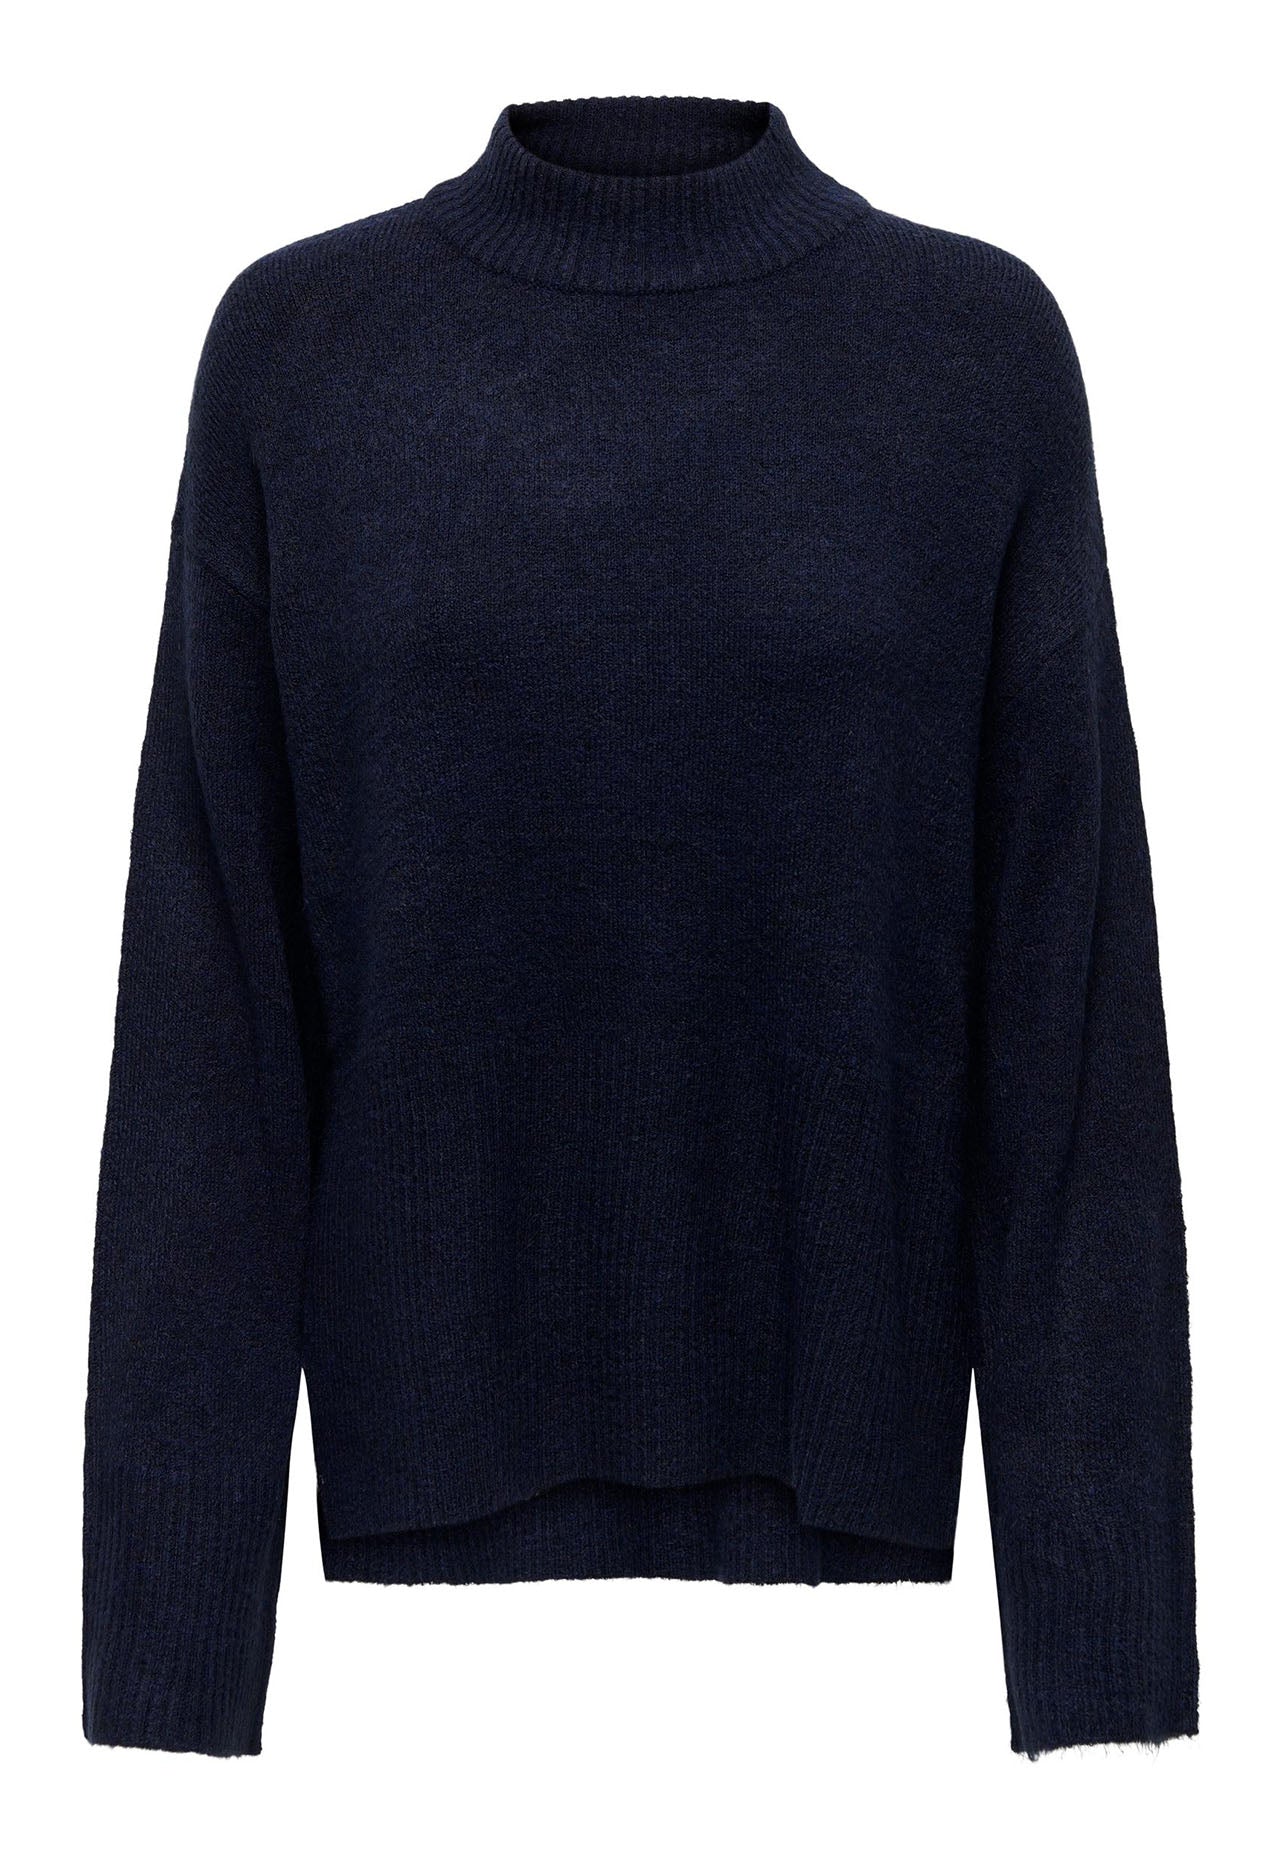 VERO MODA Gold Soft Knit Rollneck Longline Jumper with Side Splits in  French Blue  One Nation Clothing VERO MODA Gold Soft Knit Rollneck Longline  Jumper with Side Splits in